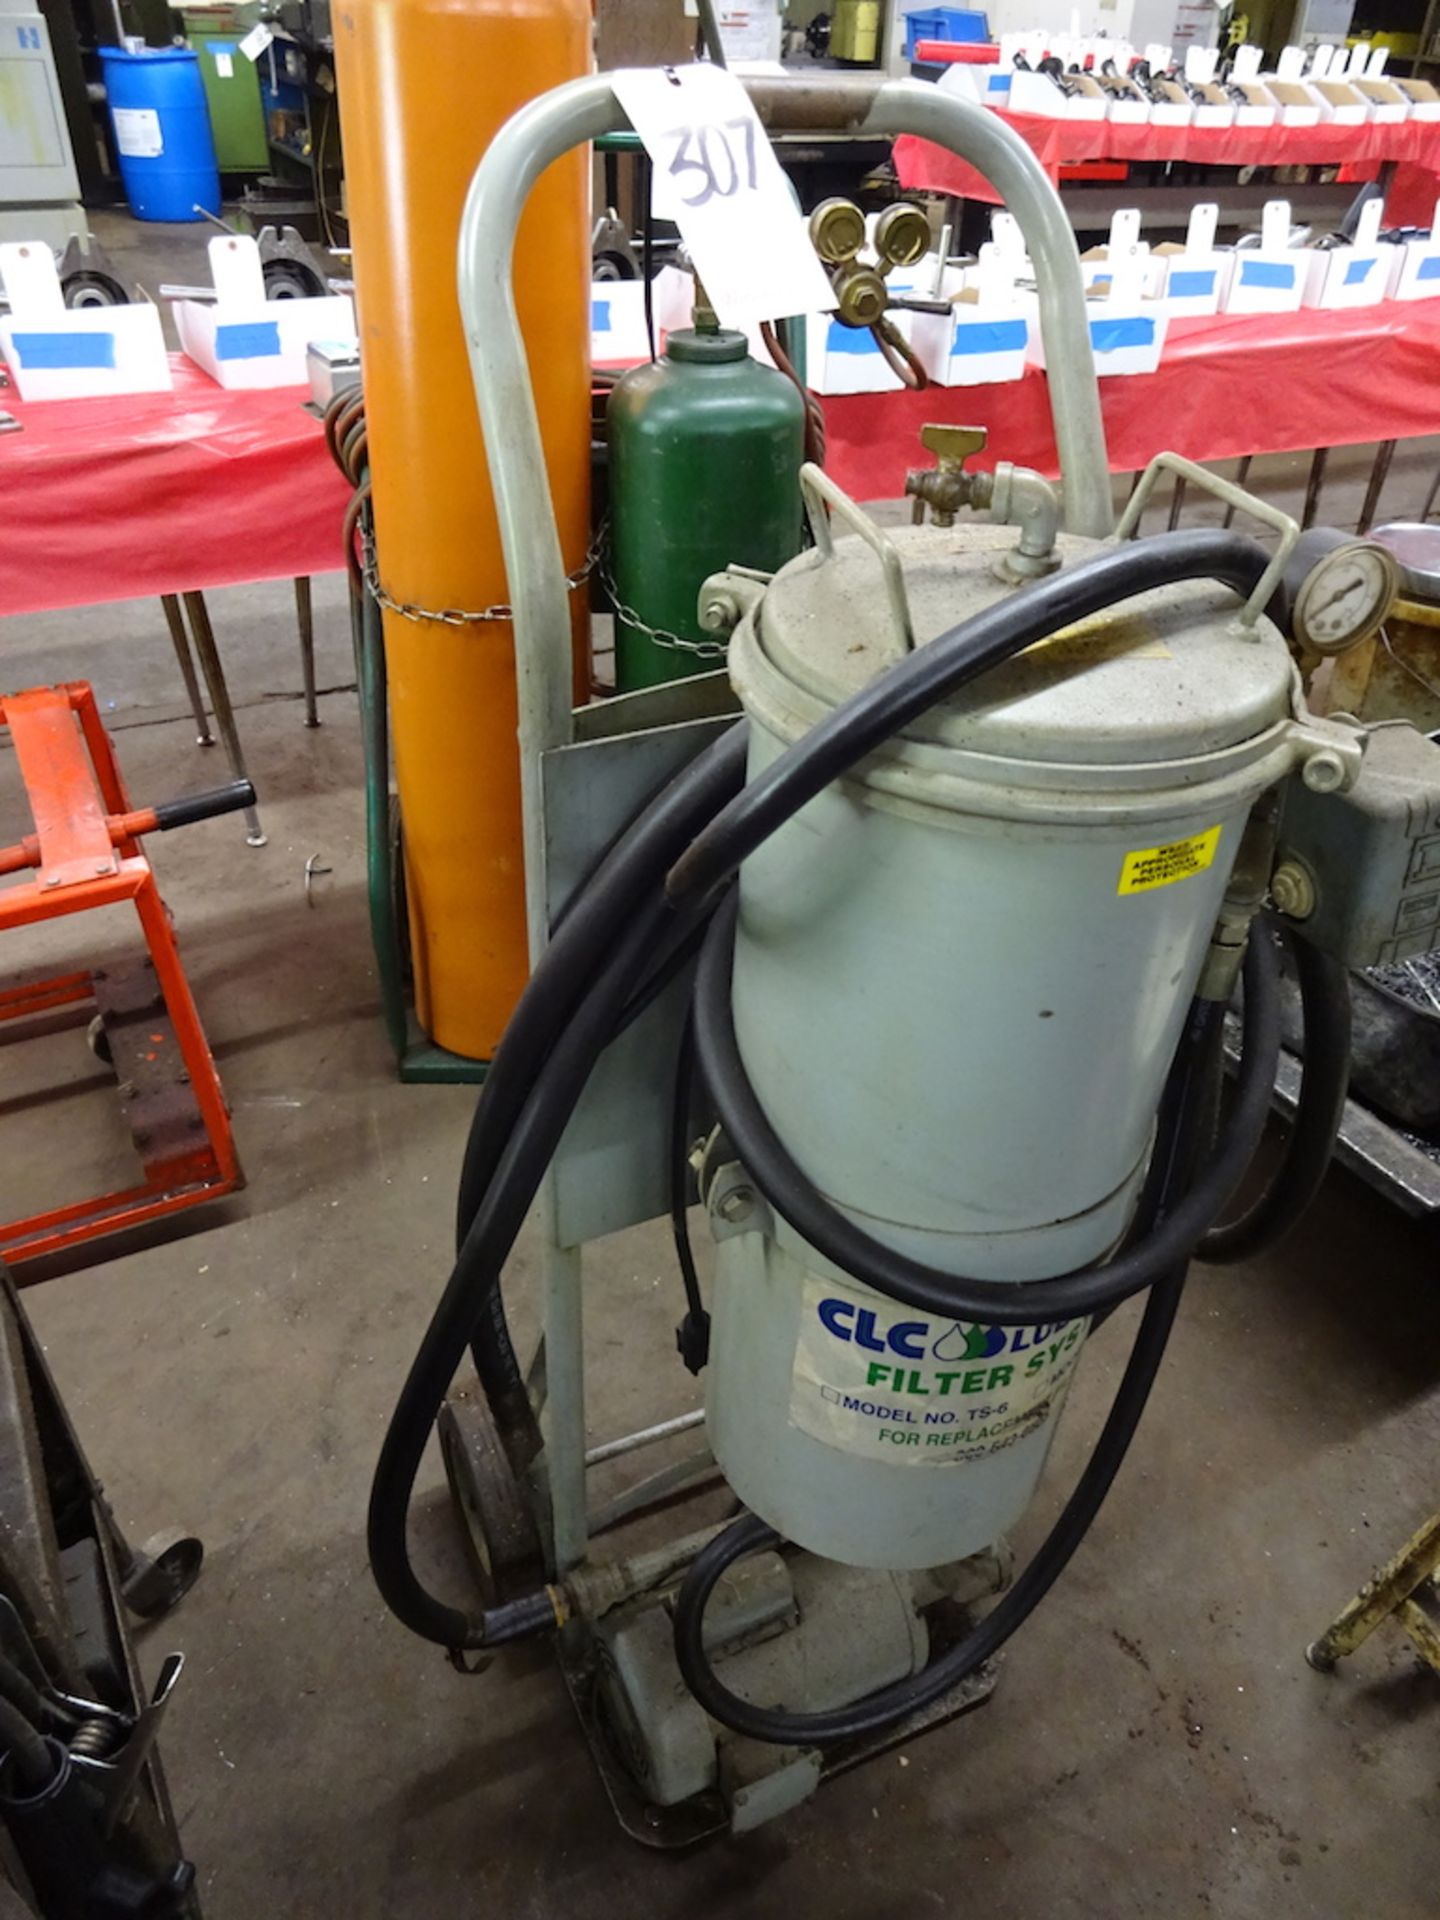 CLC Lubricant Filter System